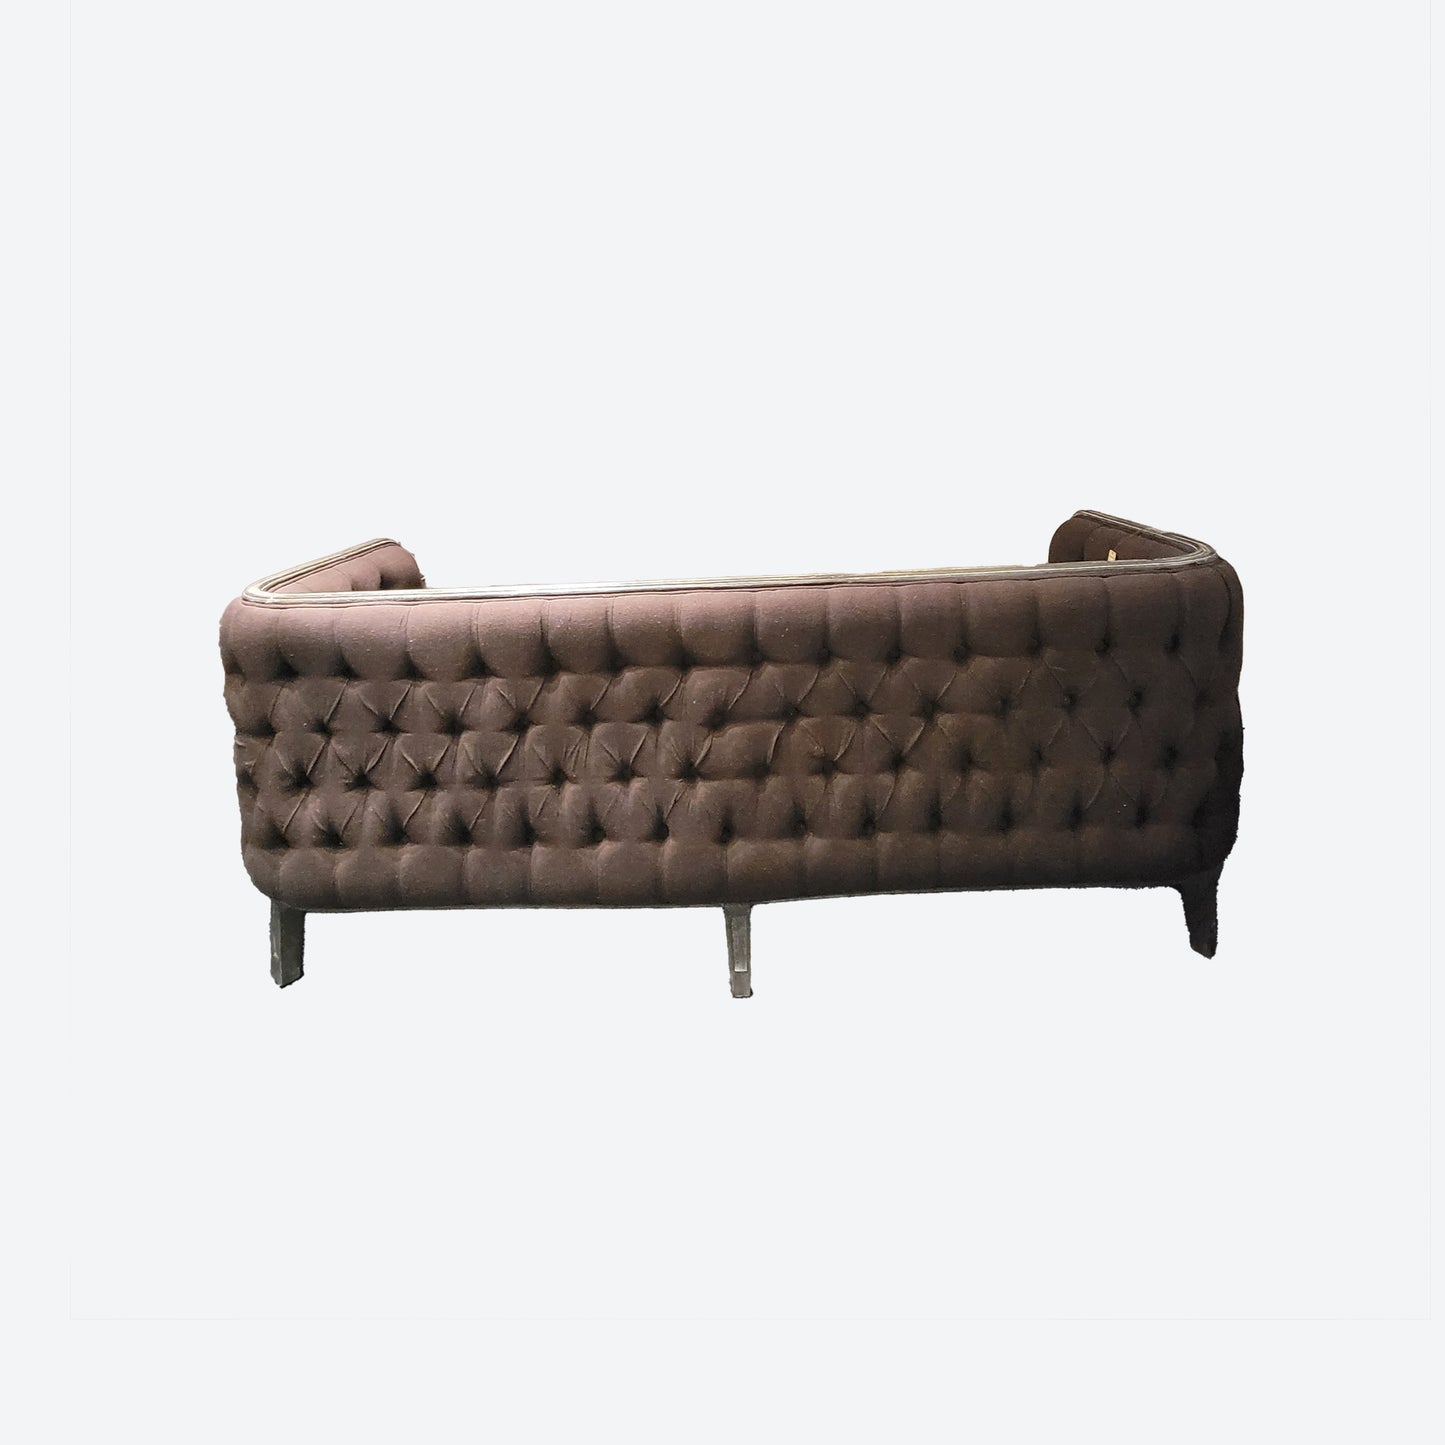 BROWN ORGANIC CANVAS FABRIC TUFTED [CHESTERFIELD LIKE] THREE SEATER SOFA WITH CEDAR ACCENTS -SK- SKU 1055